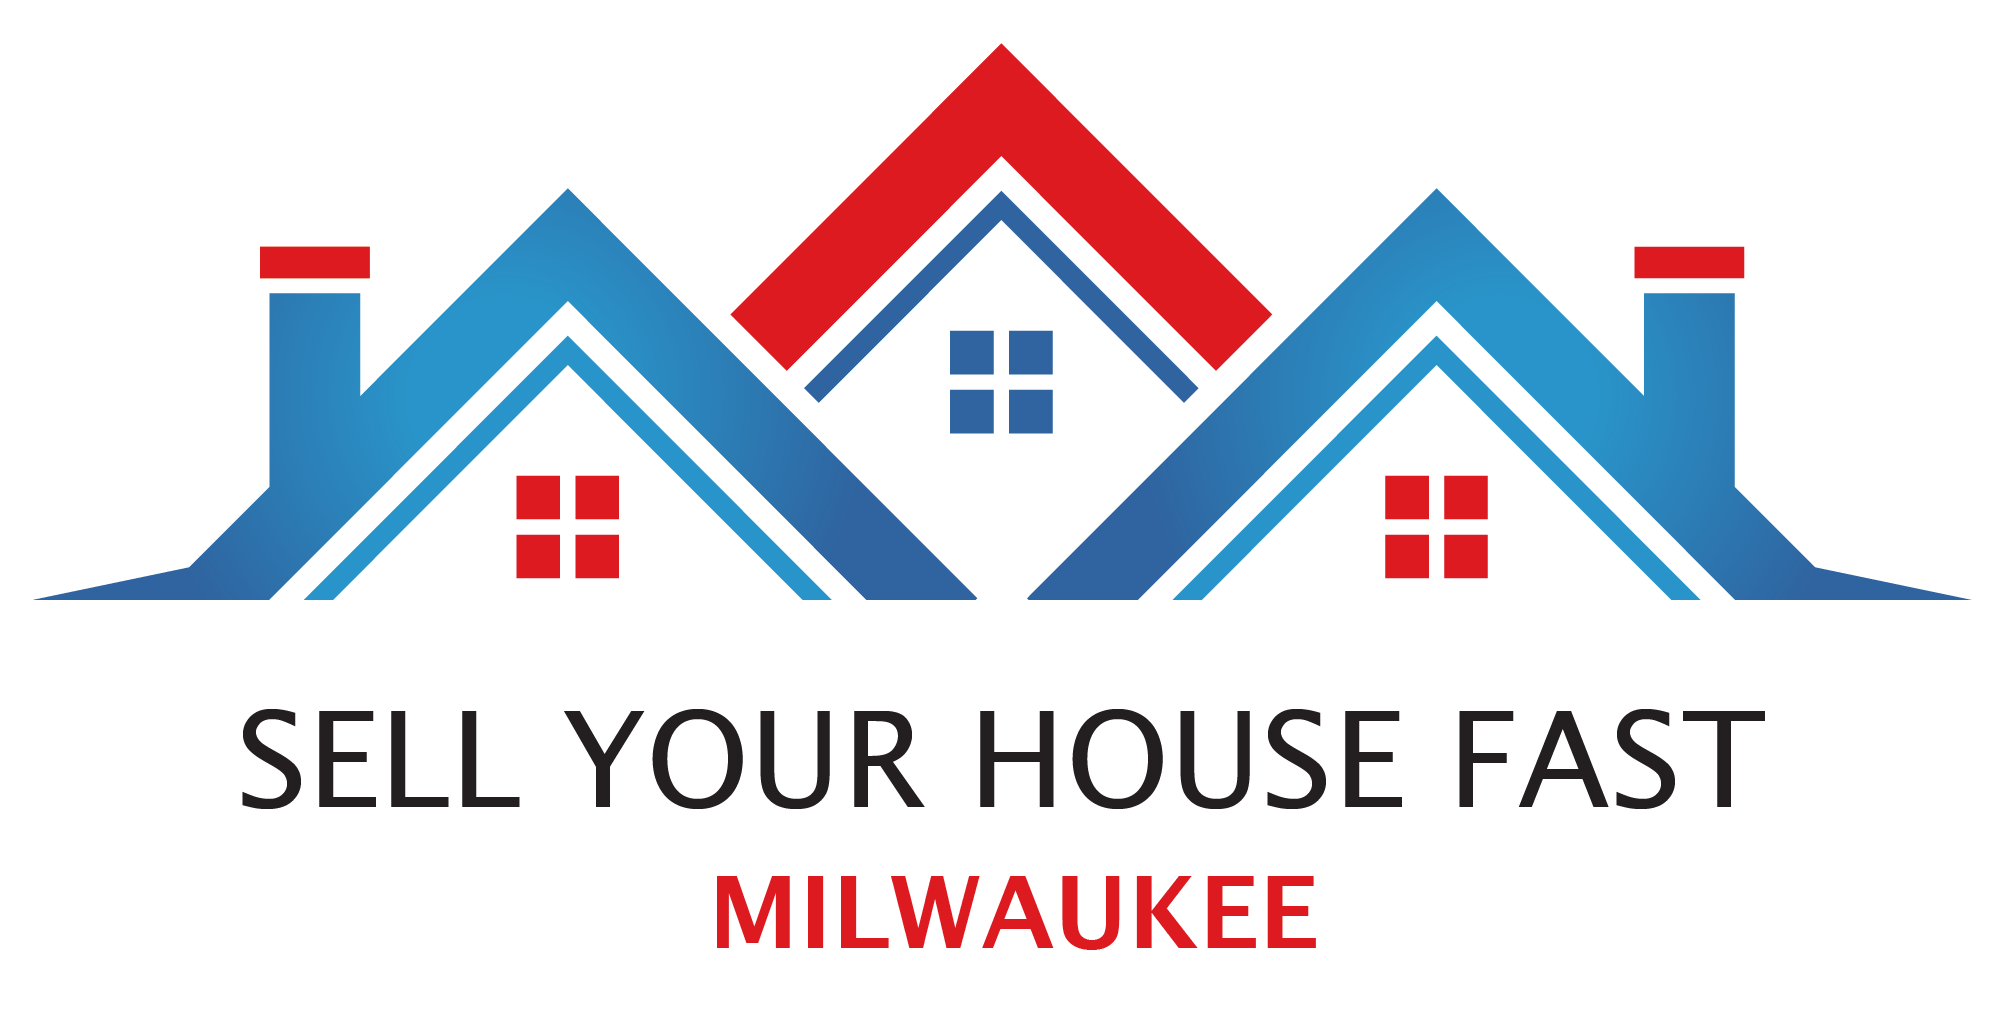 sell your house fast milwaukee logo